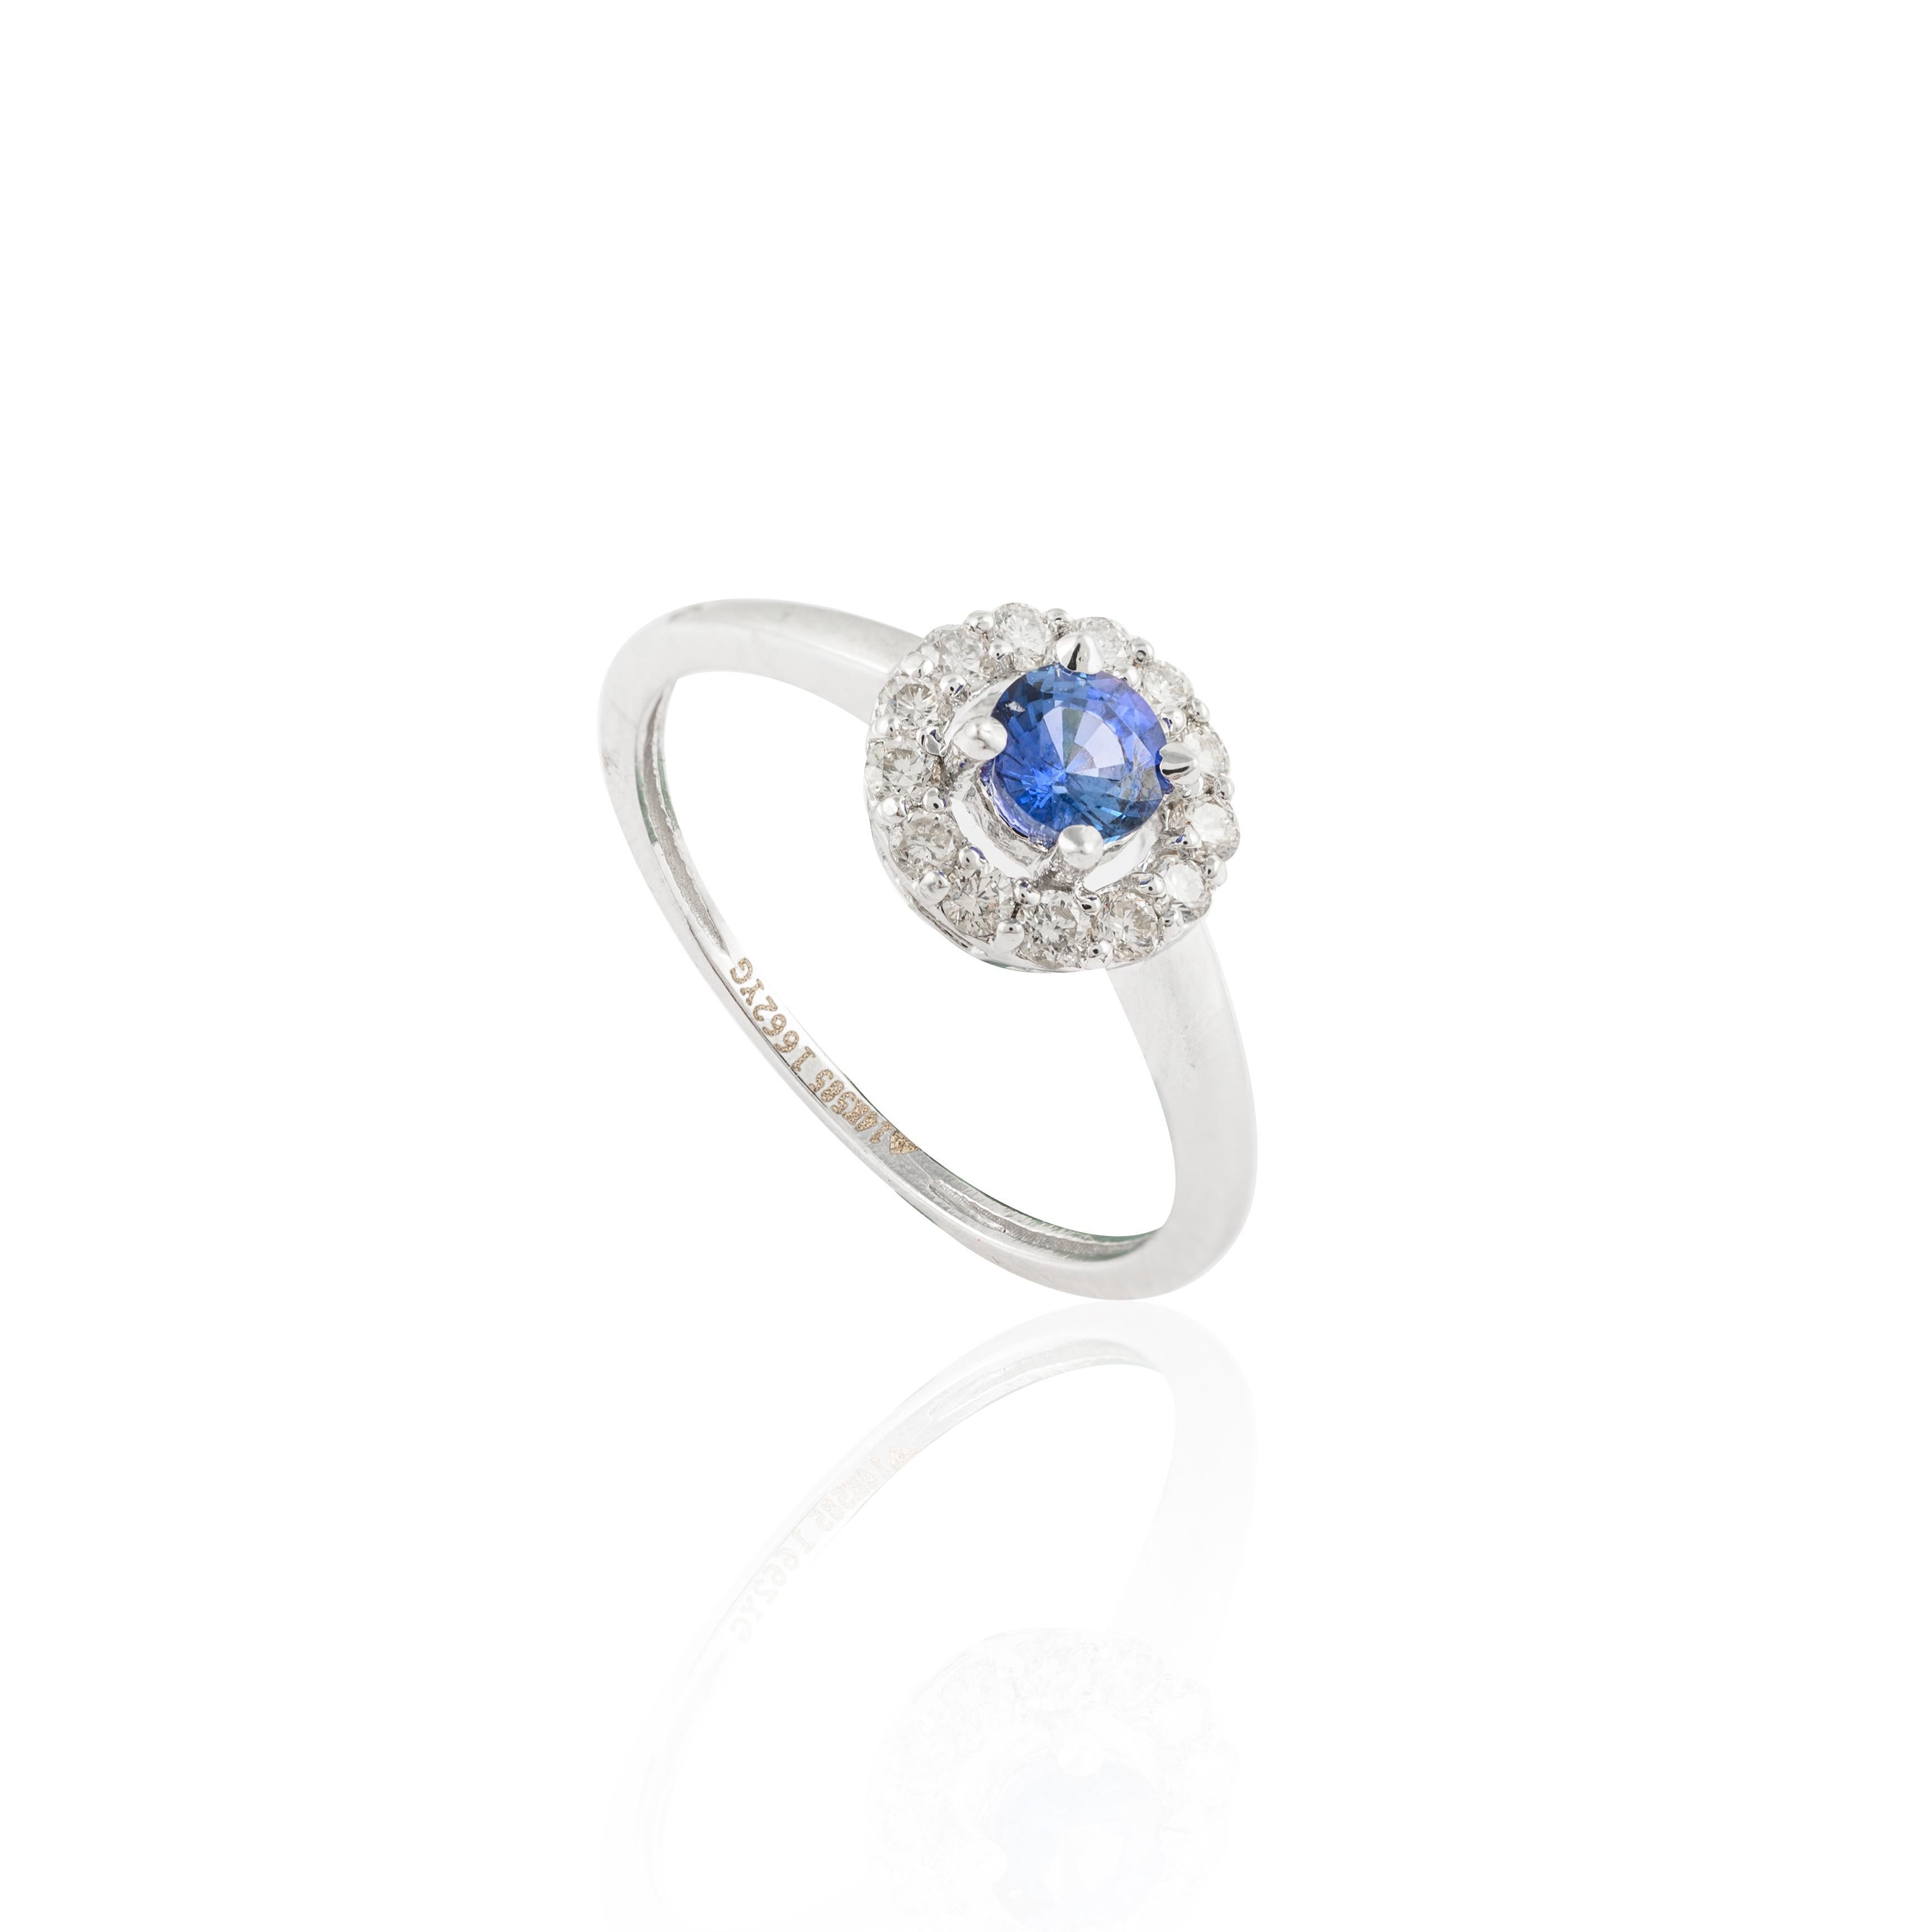 For Sale:  14K Solid White Gold Classic Round Blue Sapphire Ring with Halo Diamonds 8